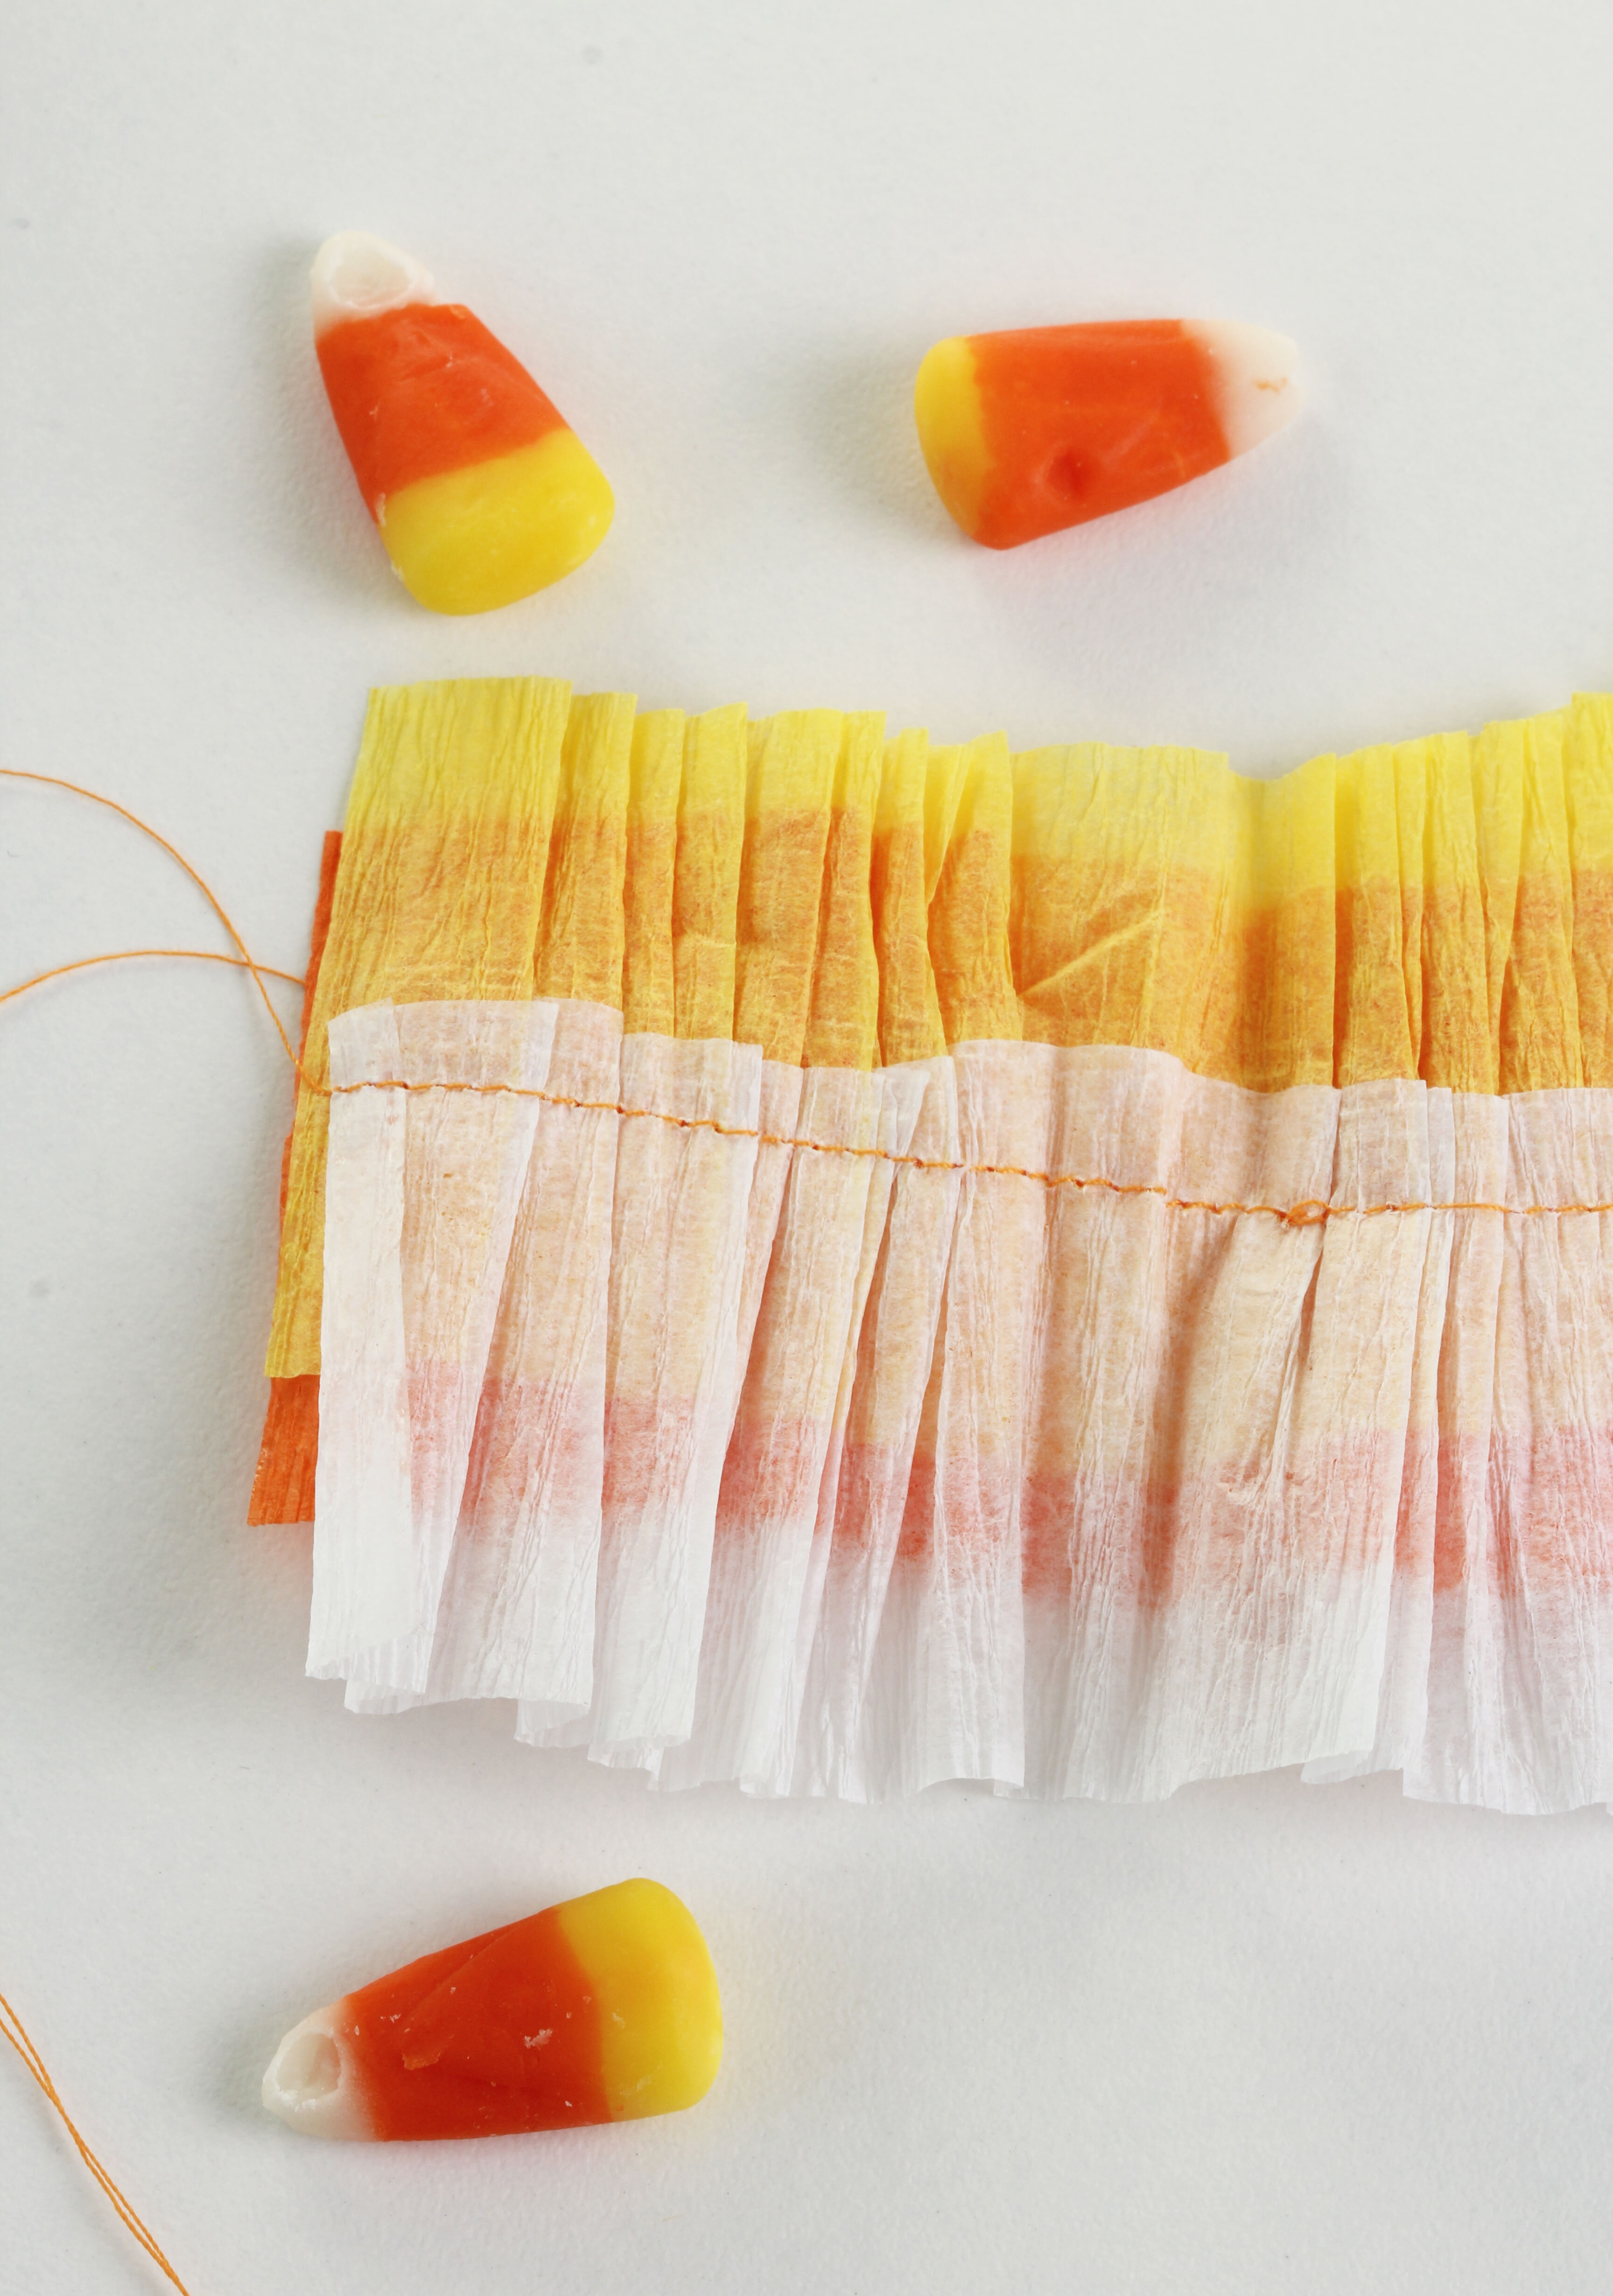 Make these festive DIY candy Corn Baskets by sewing 3 colors of crepe paper streamers together. it is fast and super easy!